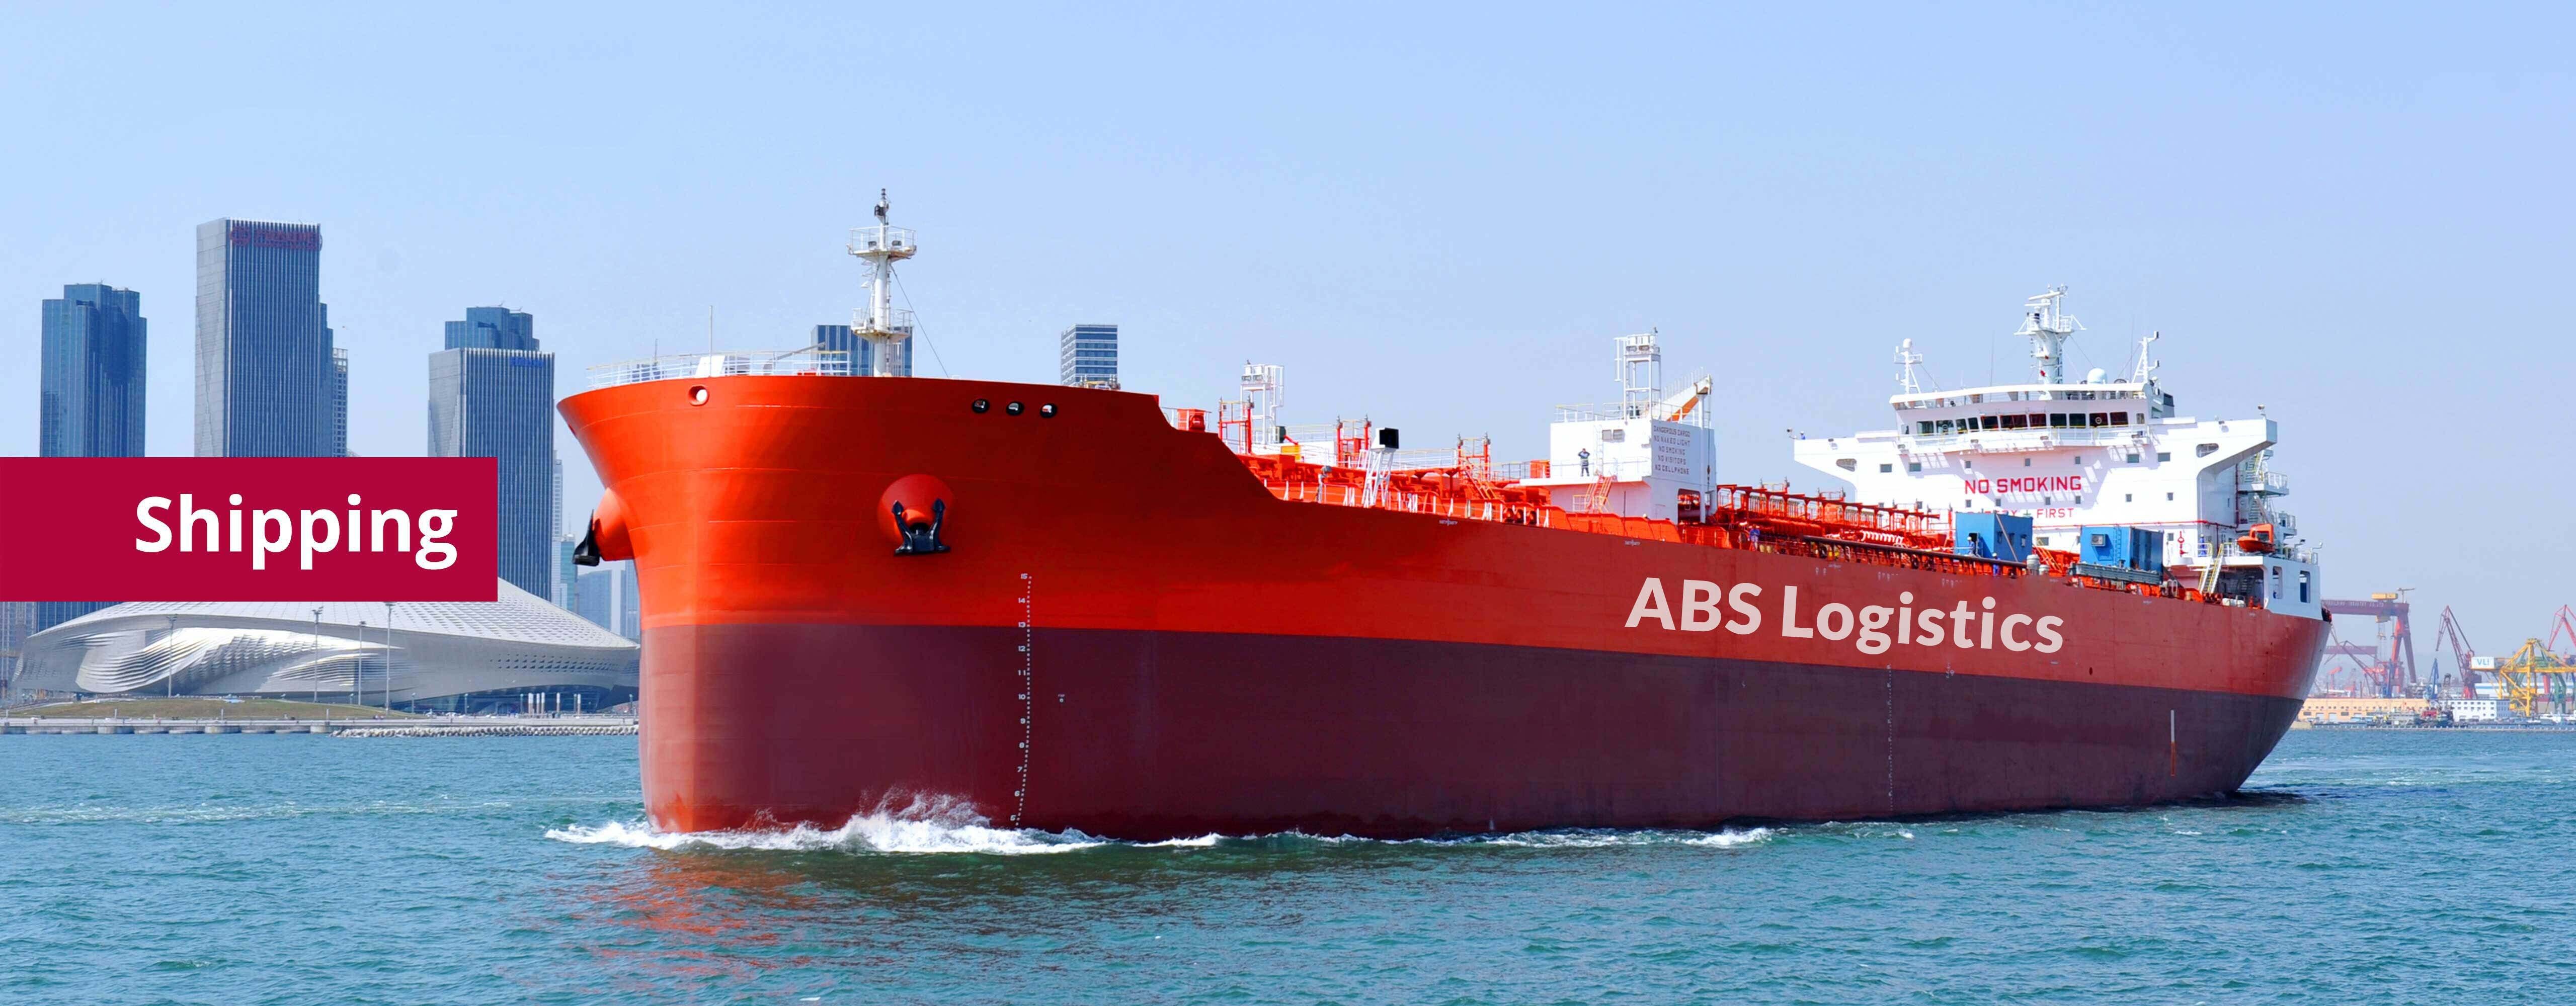 Image for Choosing The Right Partner for Industrial Shipping - Why ABS Logistics Stands Out? blog.